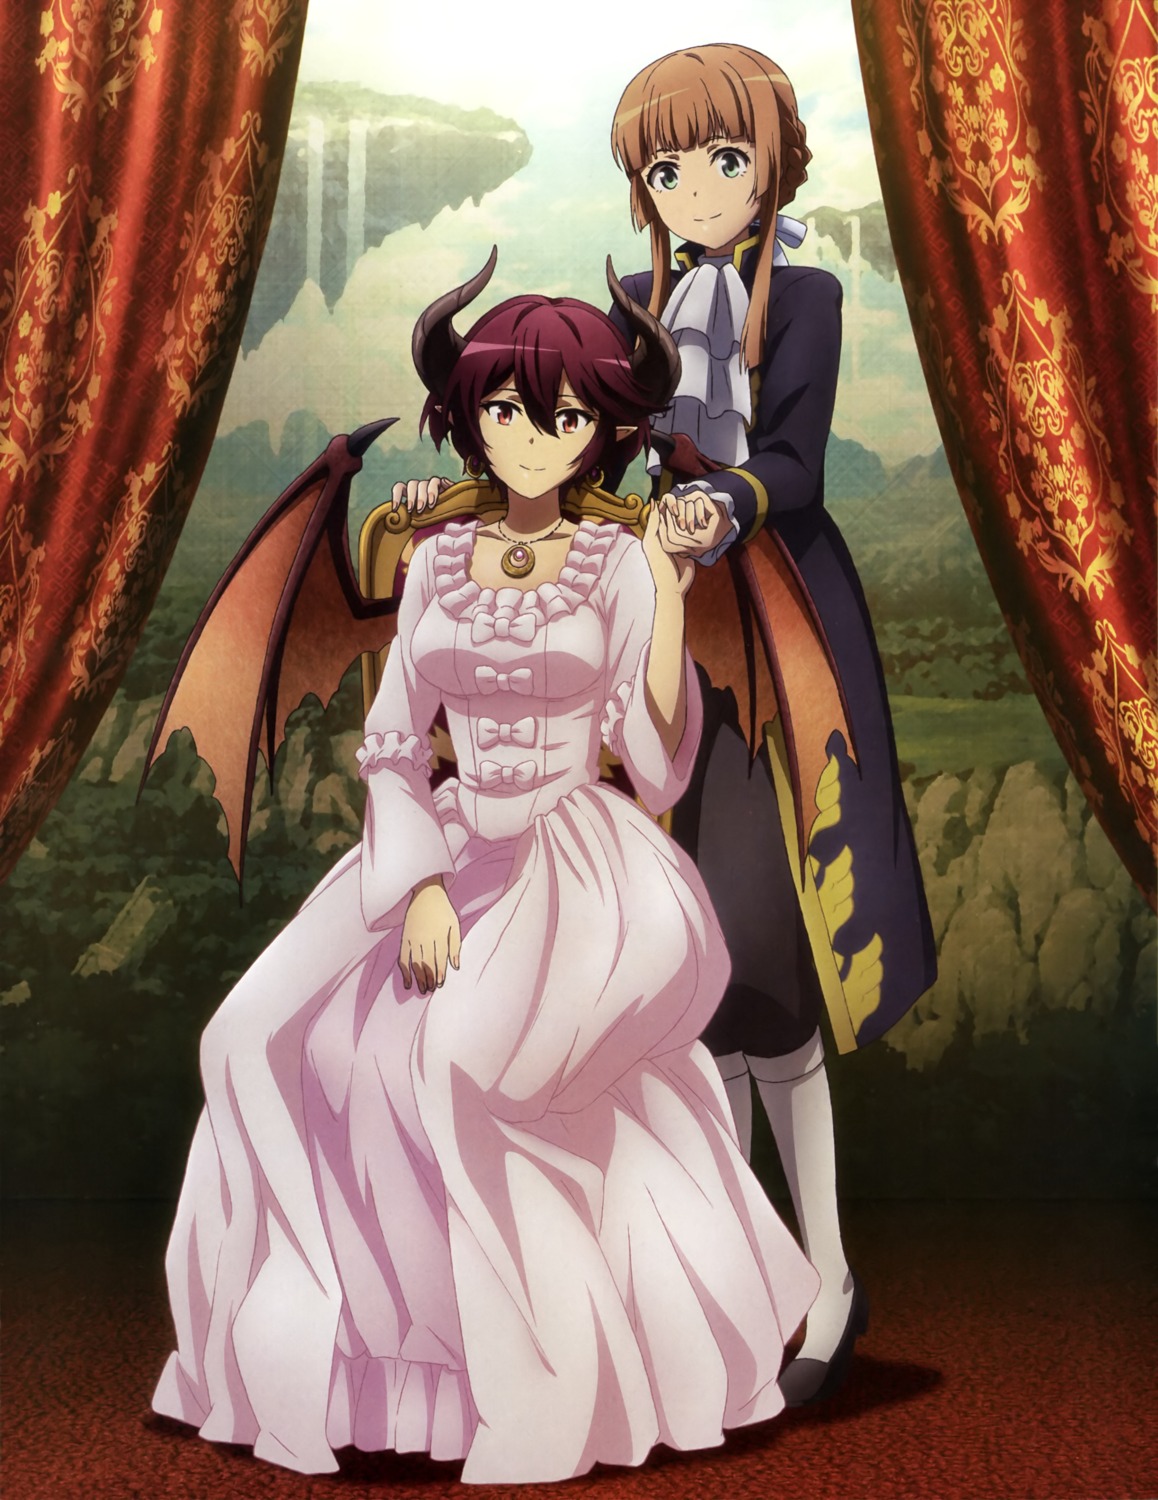 Rage of Bahamut: Manaria Friends Hanna Cosplay Costume for Sale